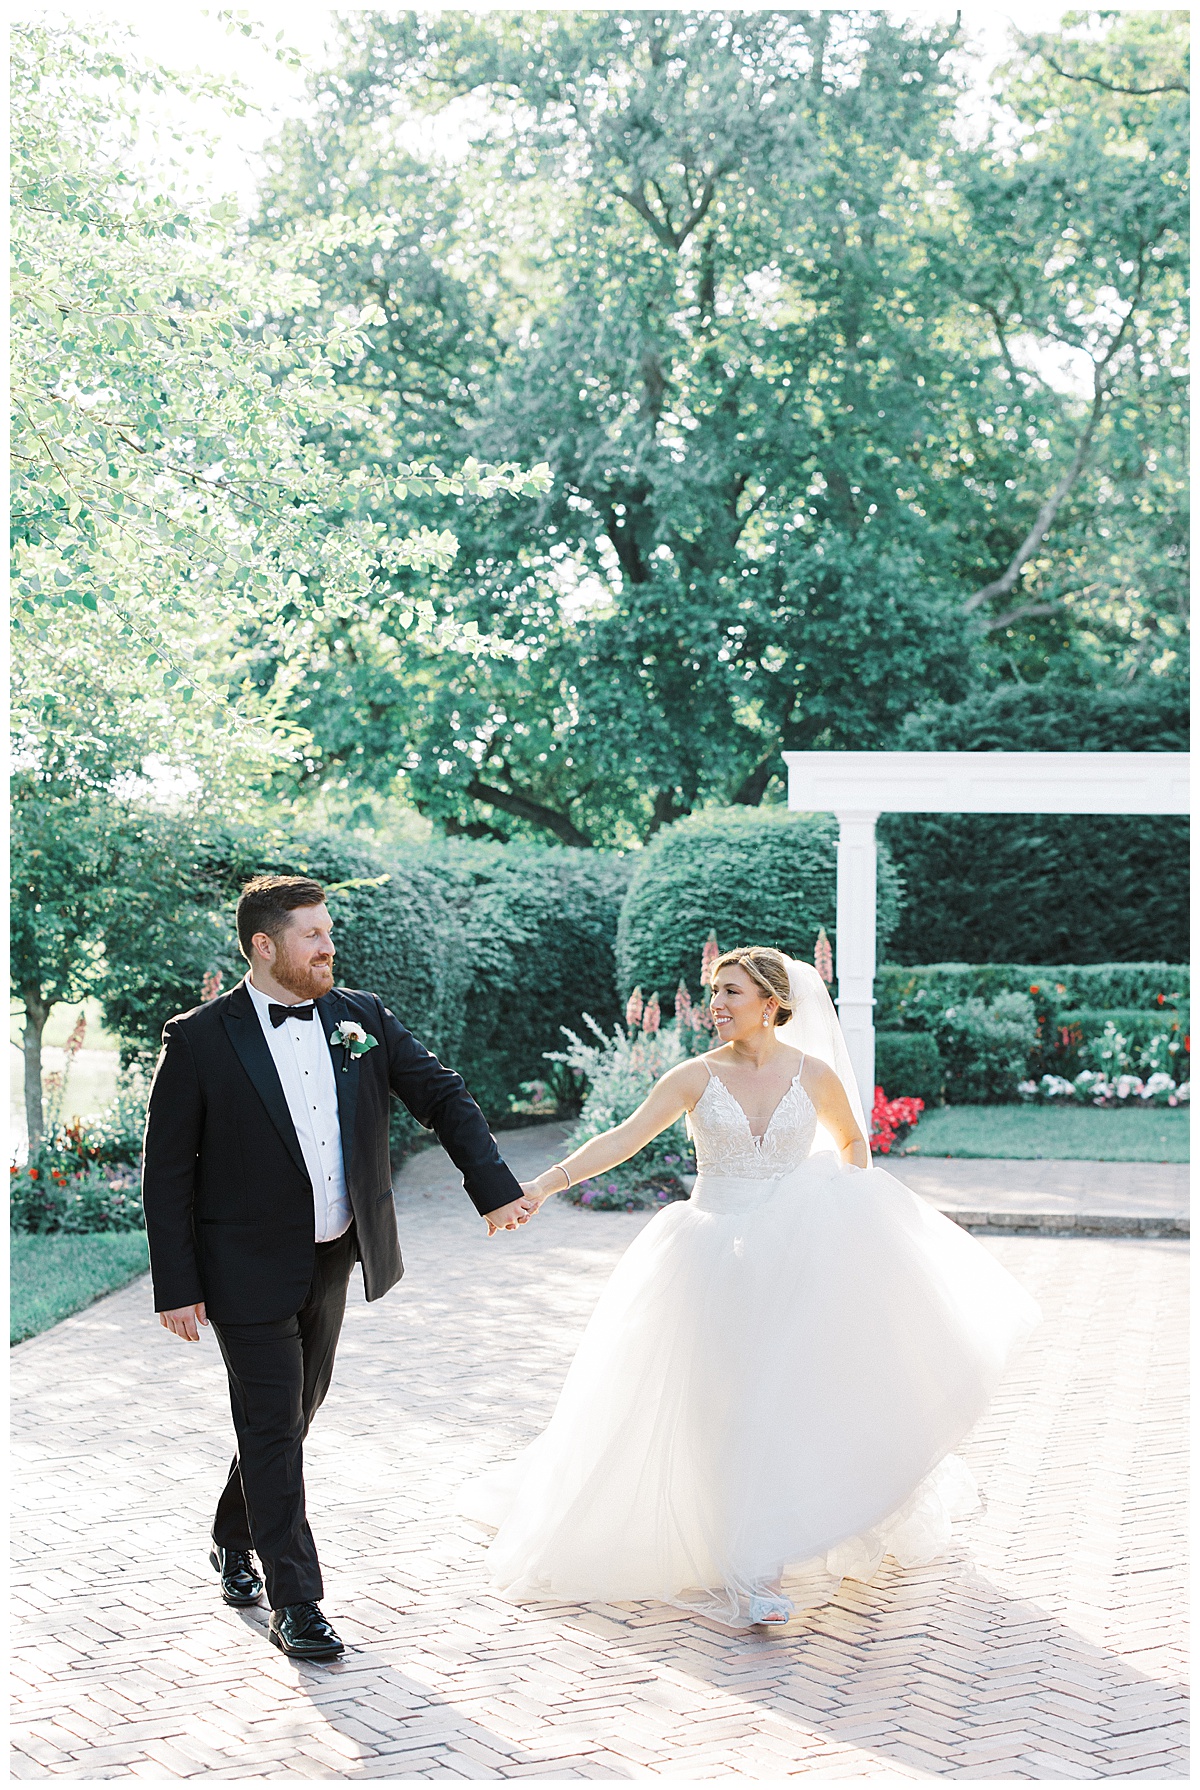 Bride and groom walk together as bride hikes up ballgown at The Mill Lakeside Manor.